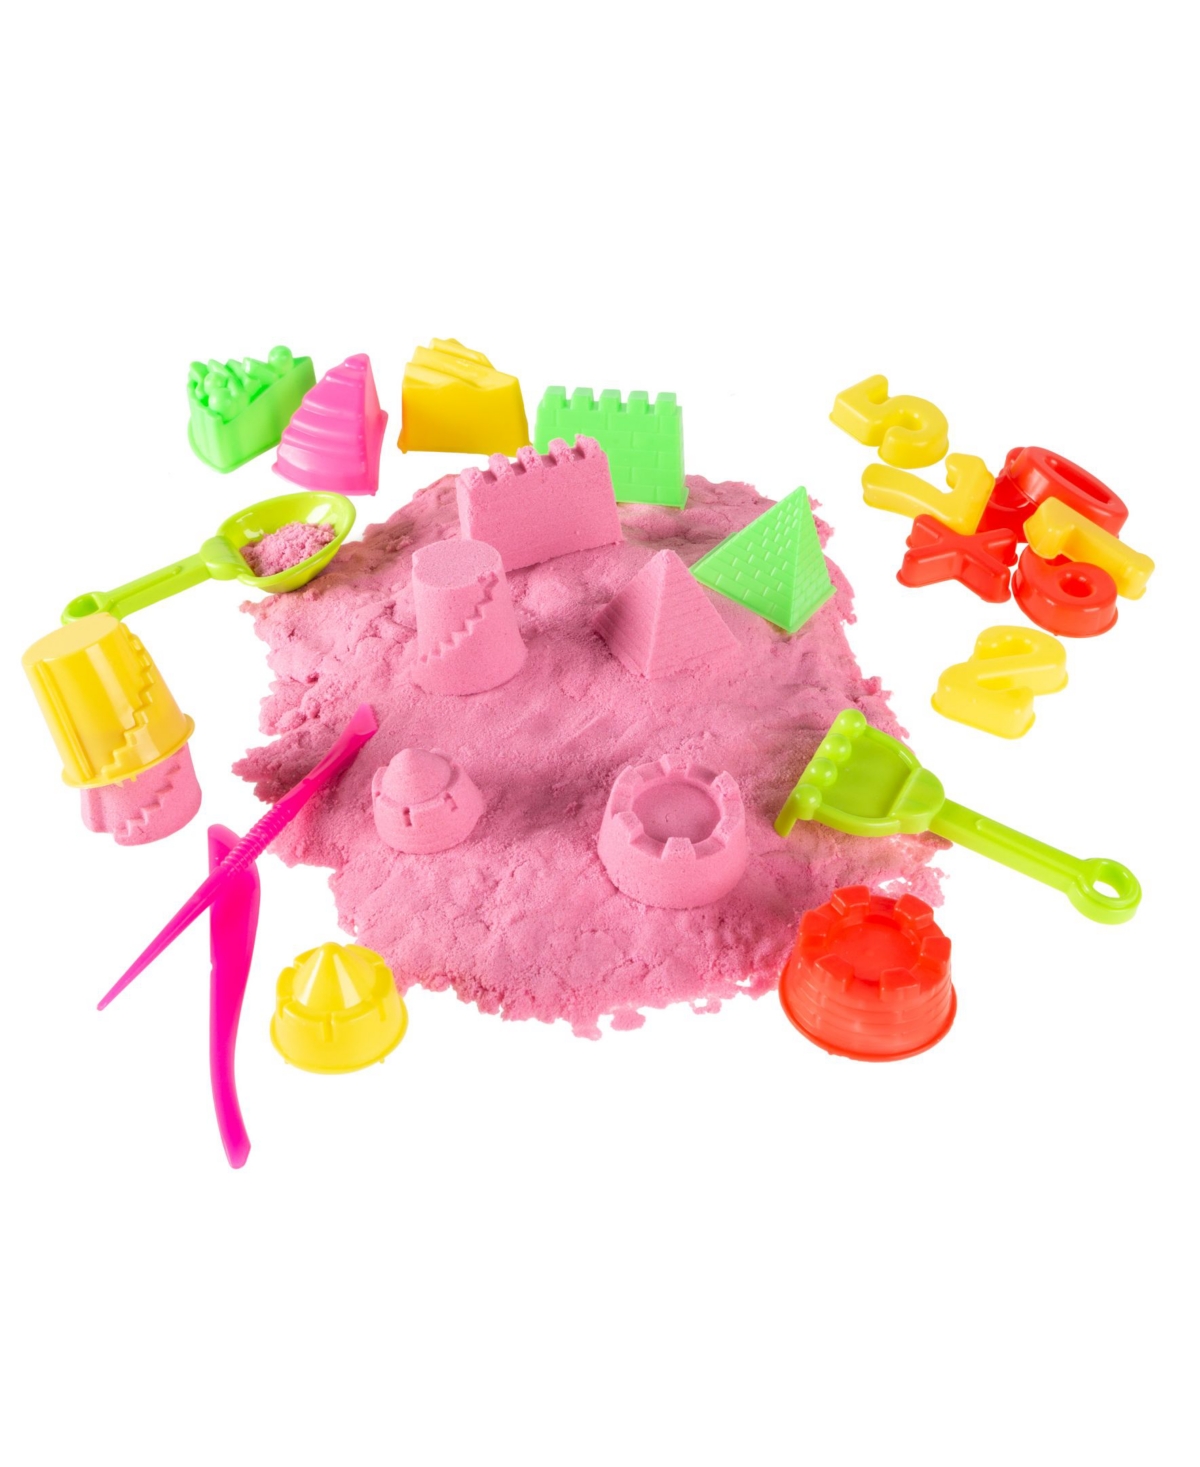 Trademark Global Hey Play Moldable Kinetic Play Activity Set- Sculpting Sand With 35 Toys And Tools-fun Creative Sens In Multi